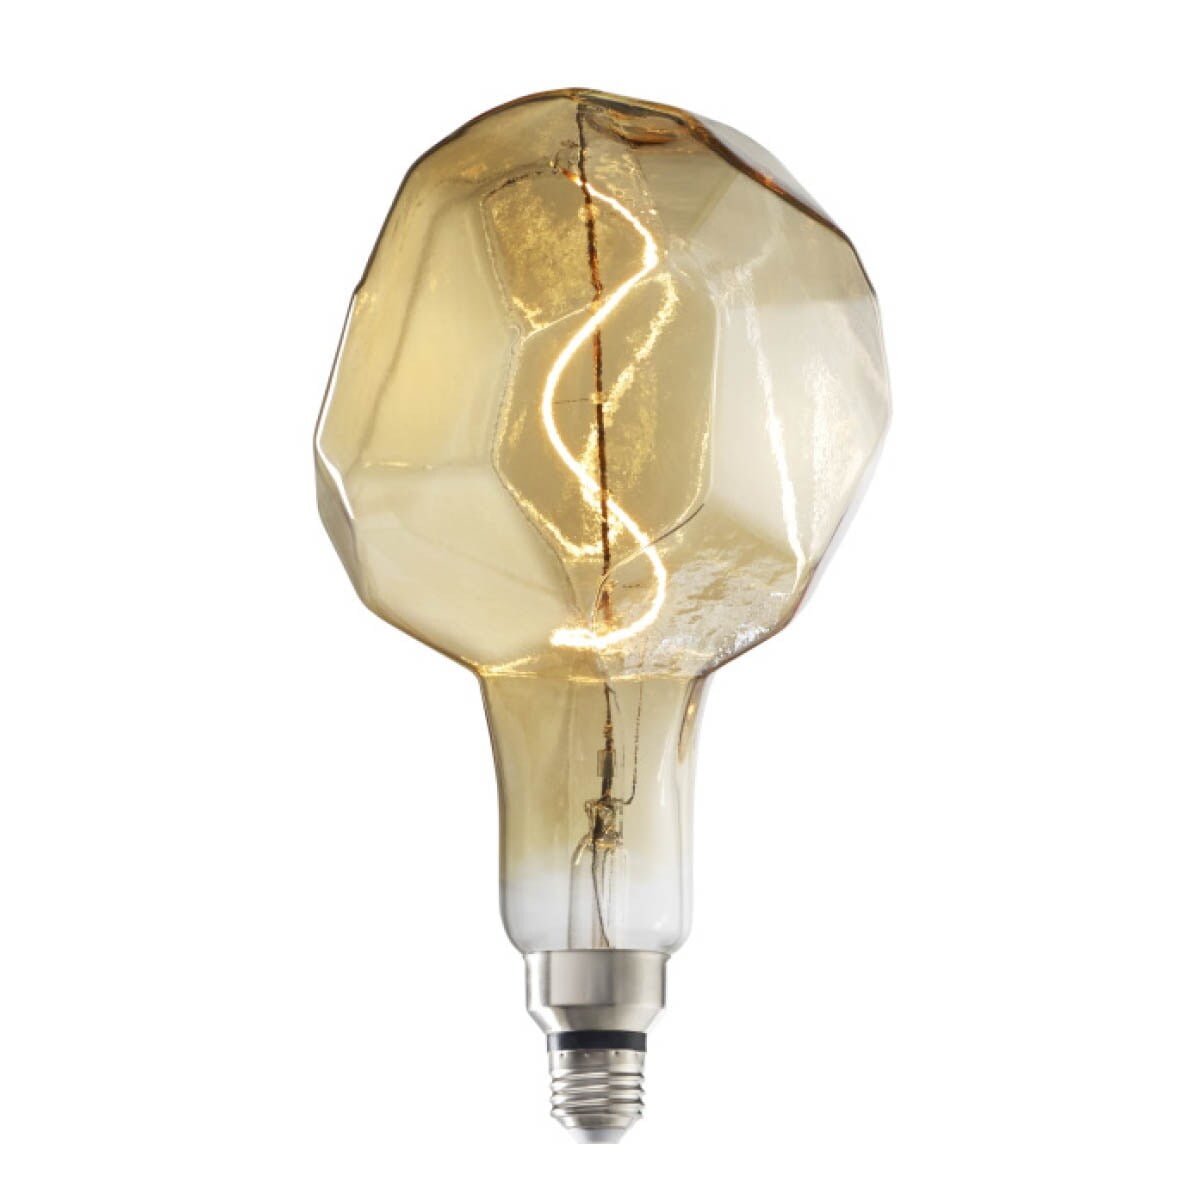 Picture of Bulbrite Grand Naturals Collection 4 Watt Dimmable Jewel Shape Oversized Decorative LED Light Bulb with Medium (E26) Base  2000K Amber Light  200 Lumens  Antique Glass Finish